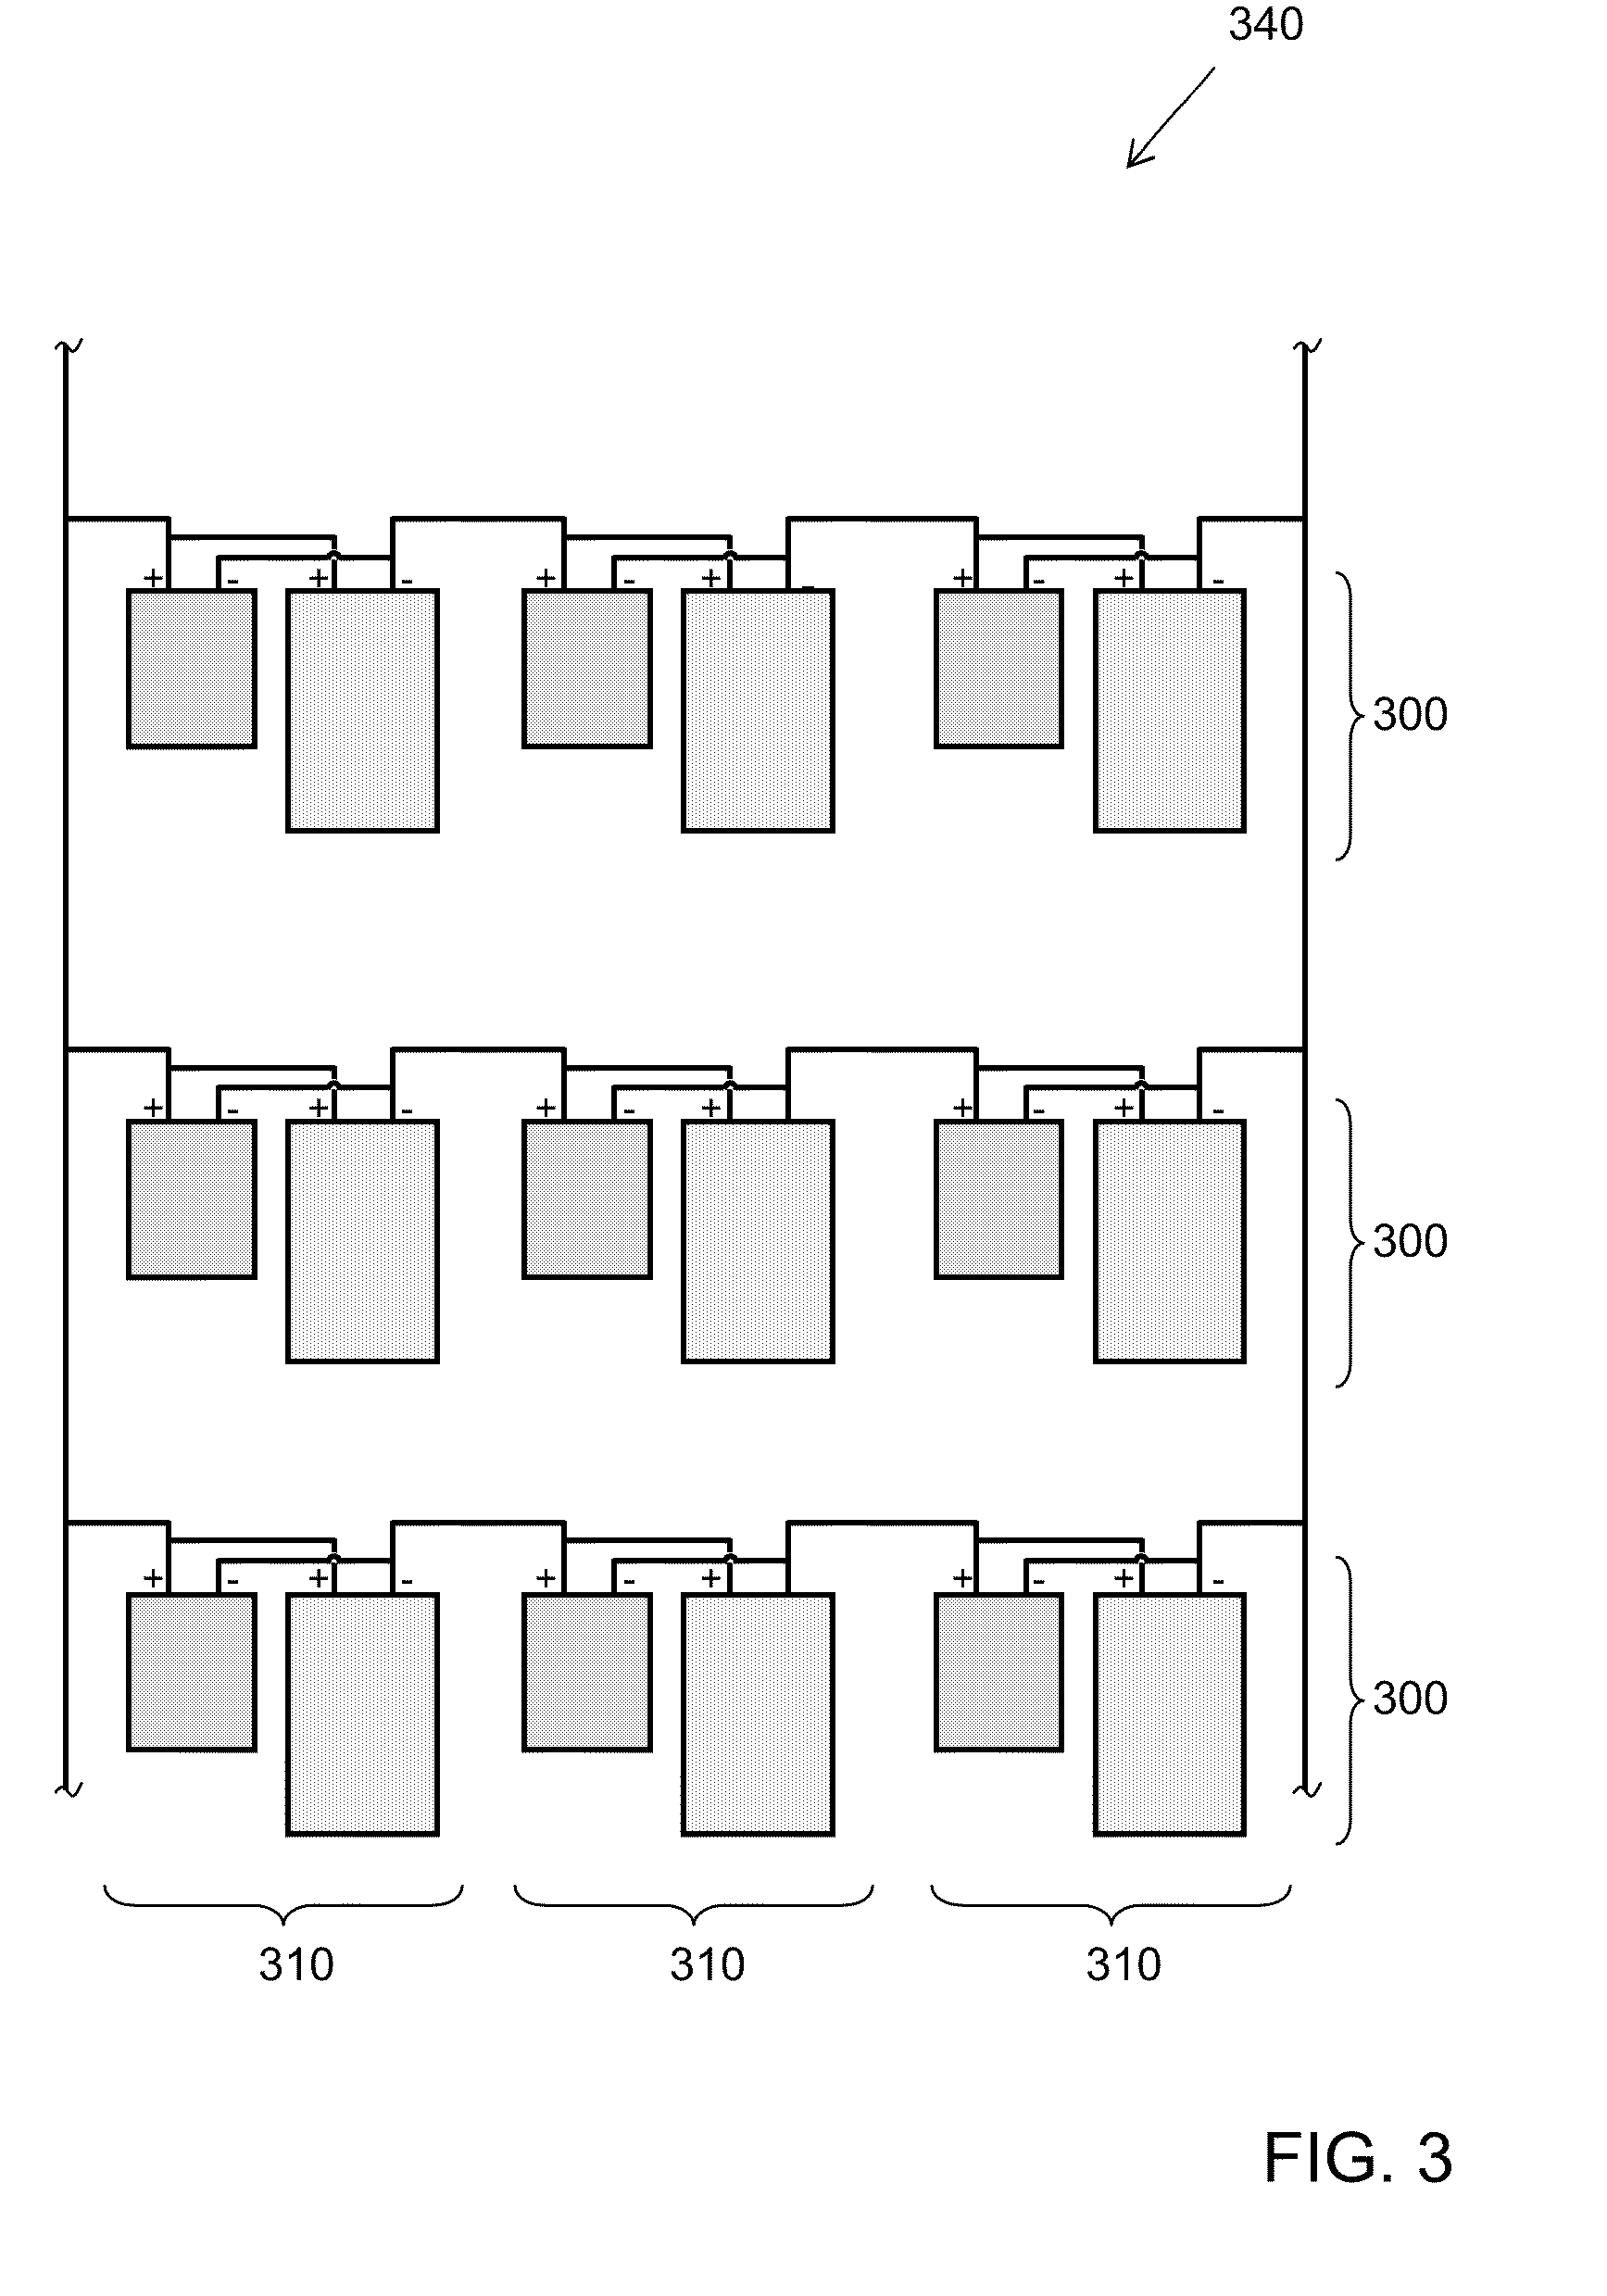 Photovoltaic Arrays, Systems and Roofing Elements Having Parallel-Series Wiring Architectures